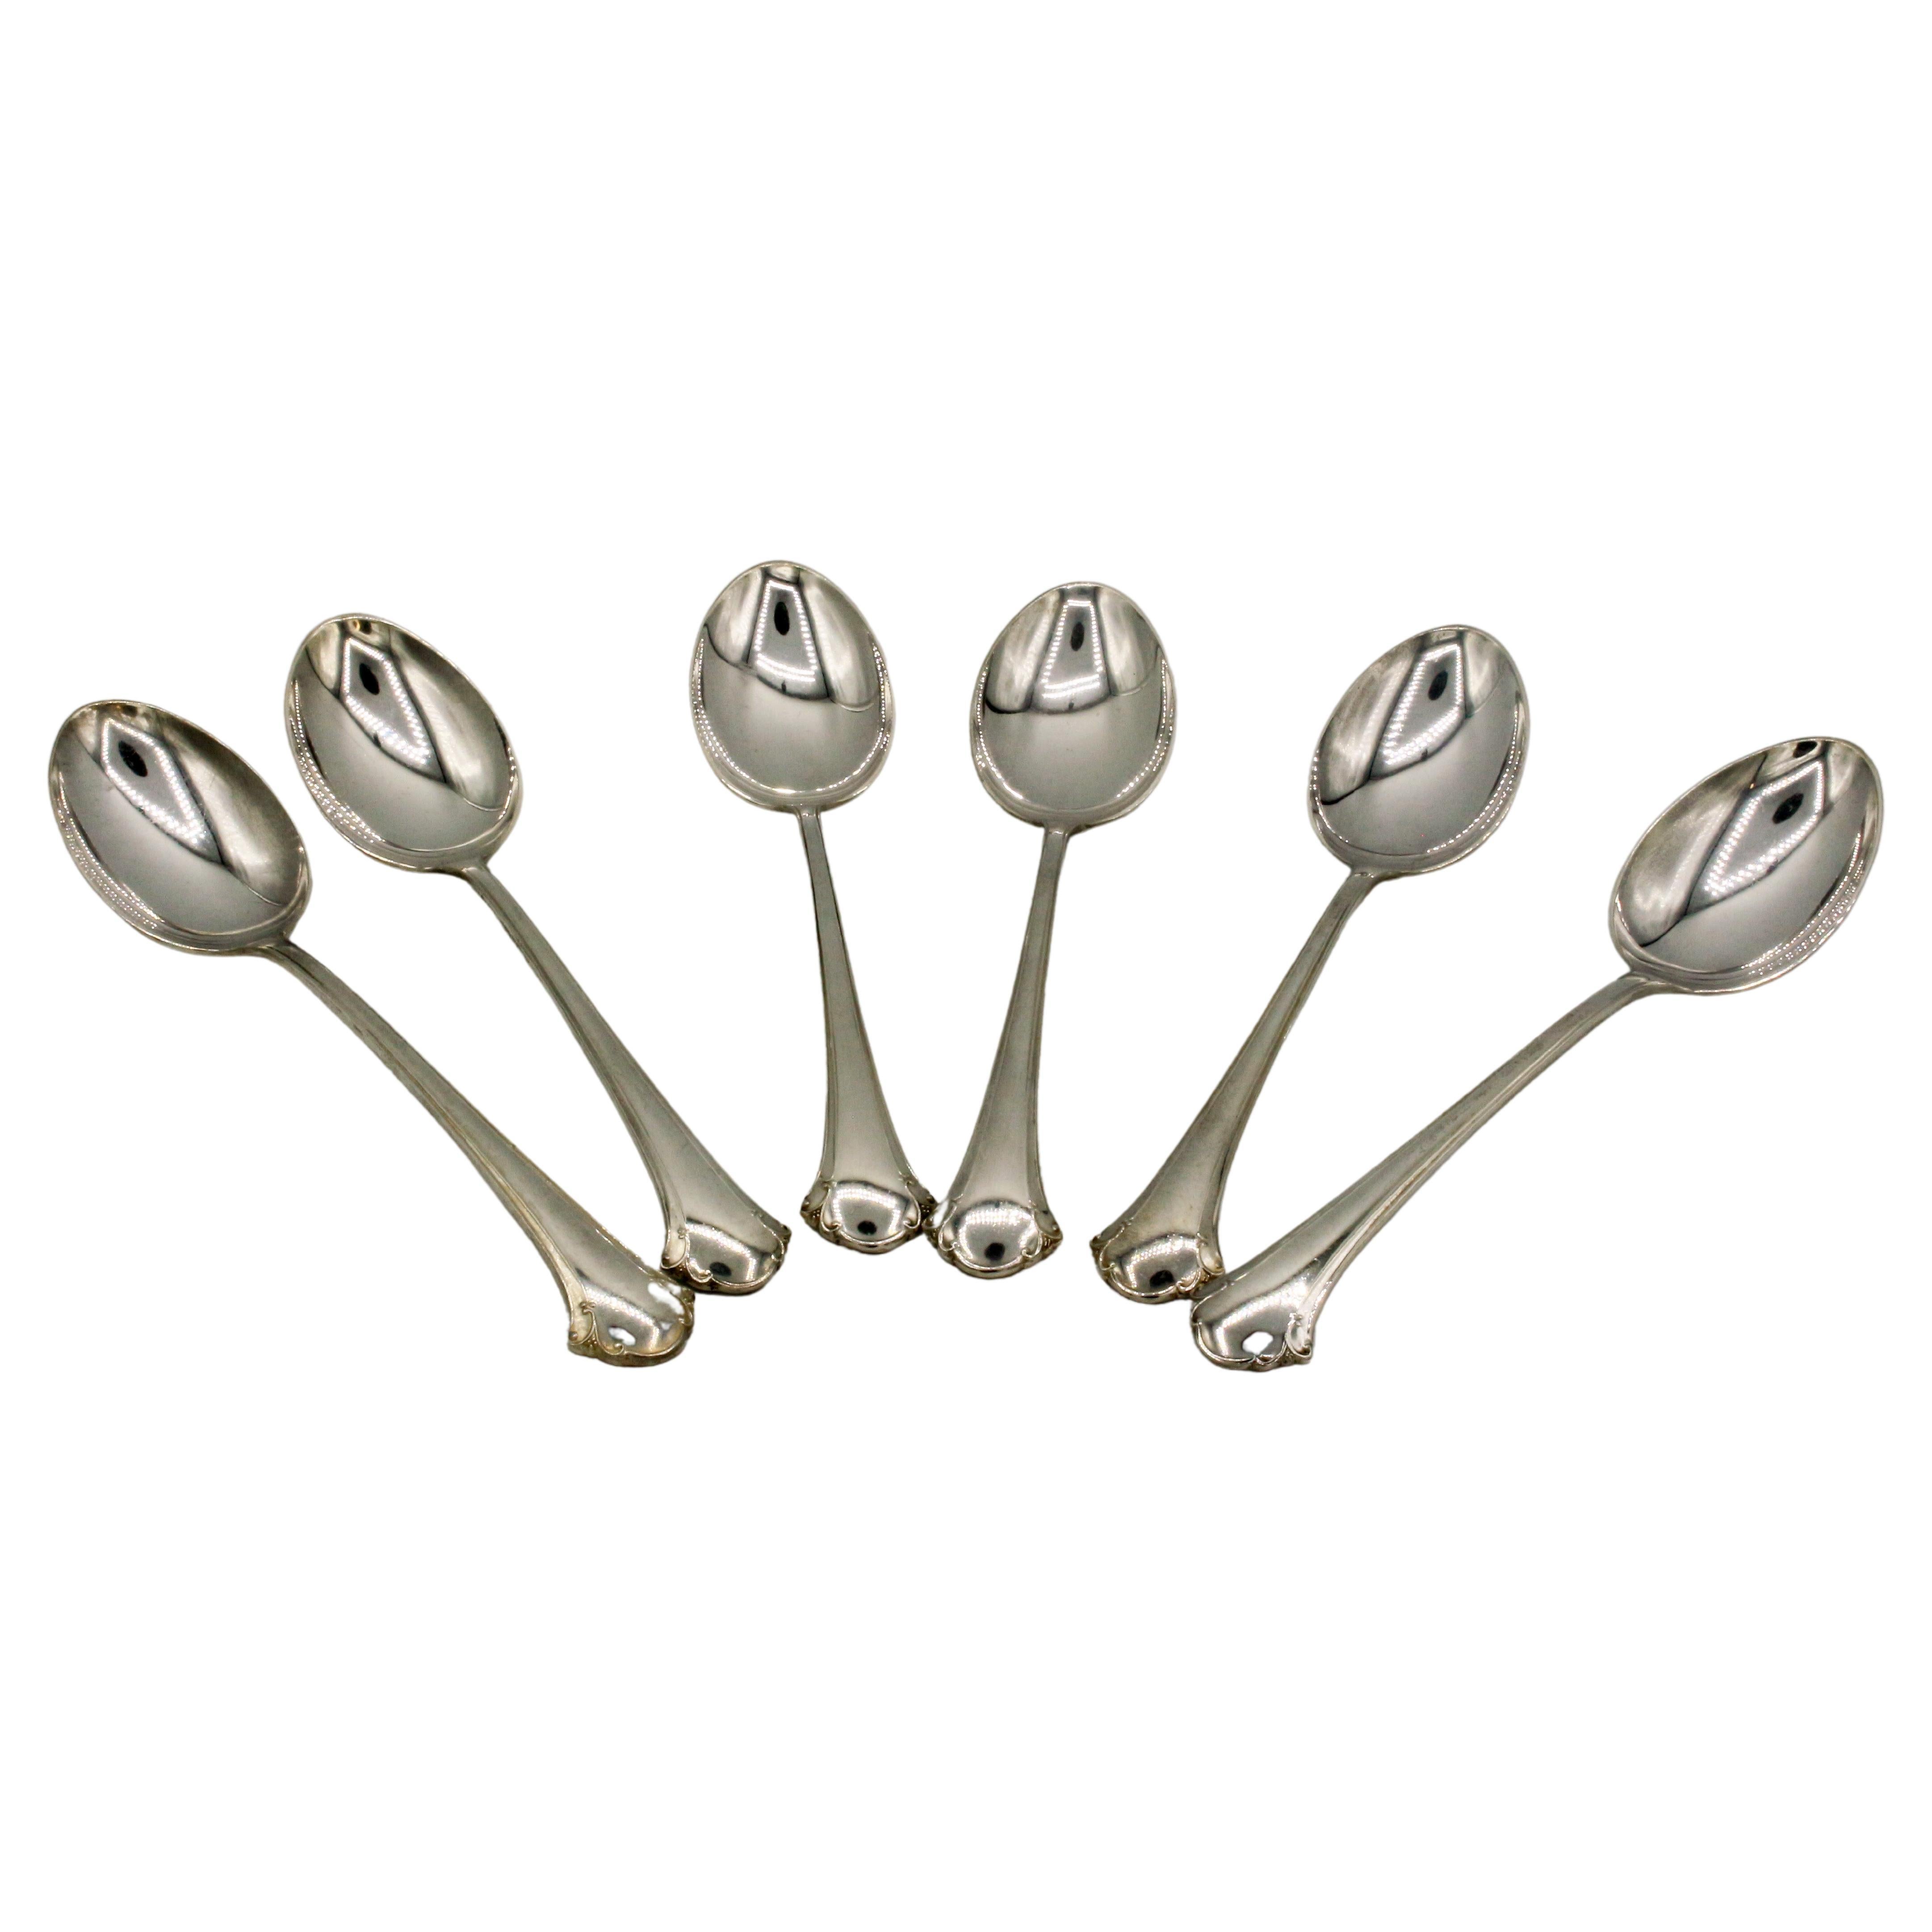 Set of 6 Sterling Silver Teaspoons by Towle For Sale